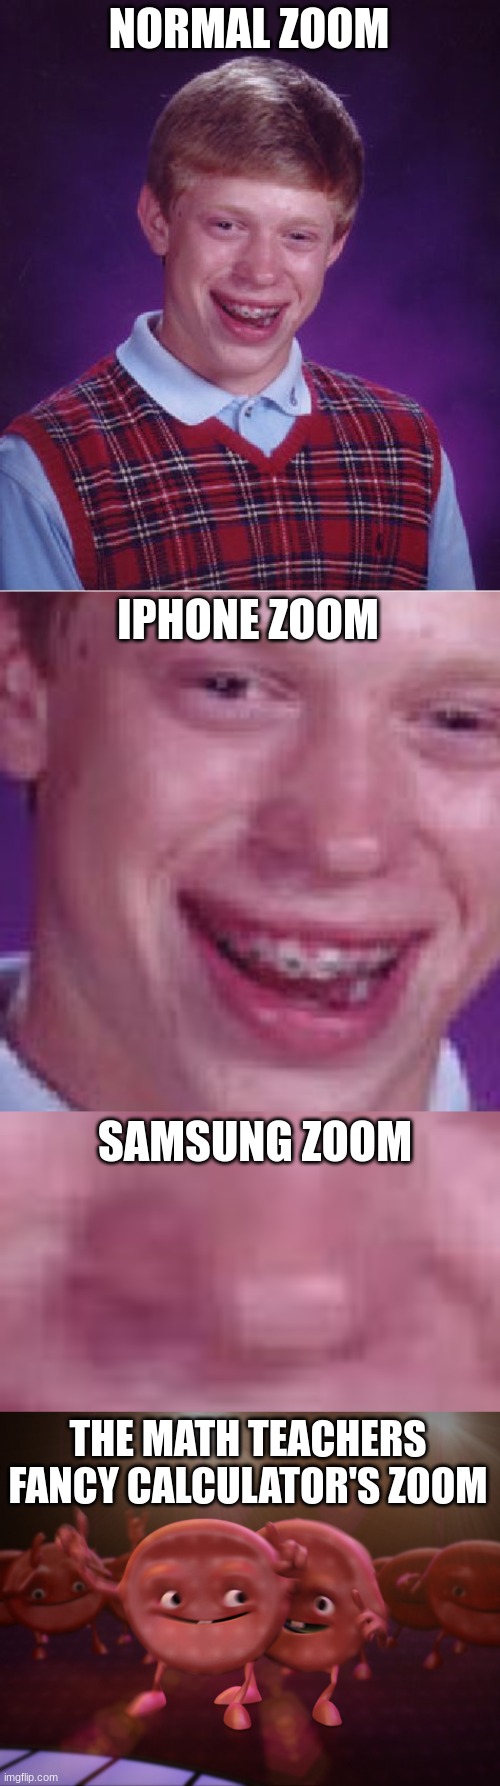 factttttttttttttssssssssssssssssssss | NORMAL ZOOM; IPHONE ZOOM; SAMSUNG ZOOM; THE MATH TEACHERS FANCY CALCULATOR'S ZOOM | image tagged in memes,bad luck brian,gifs,very funny,funny,meme | made w/ Imgflip meme maker